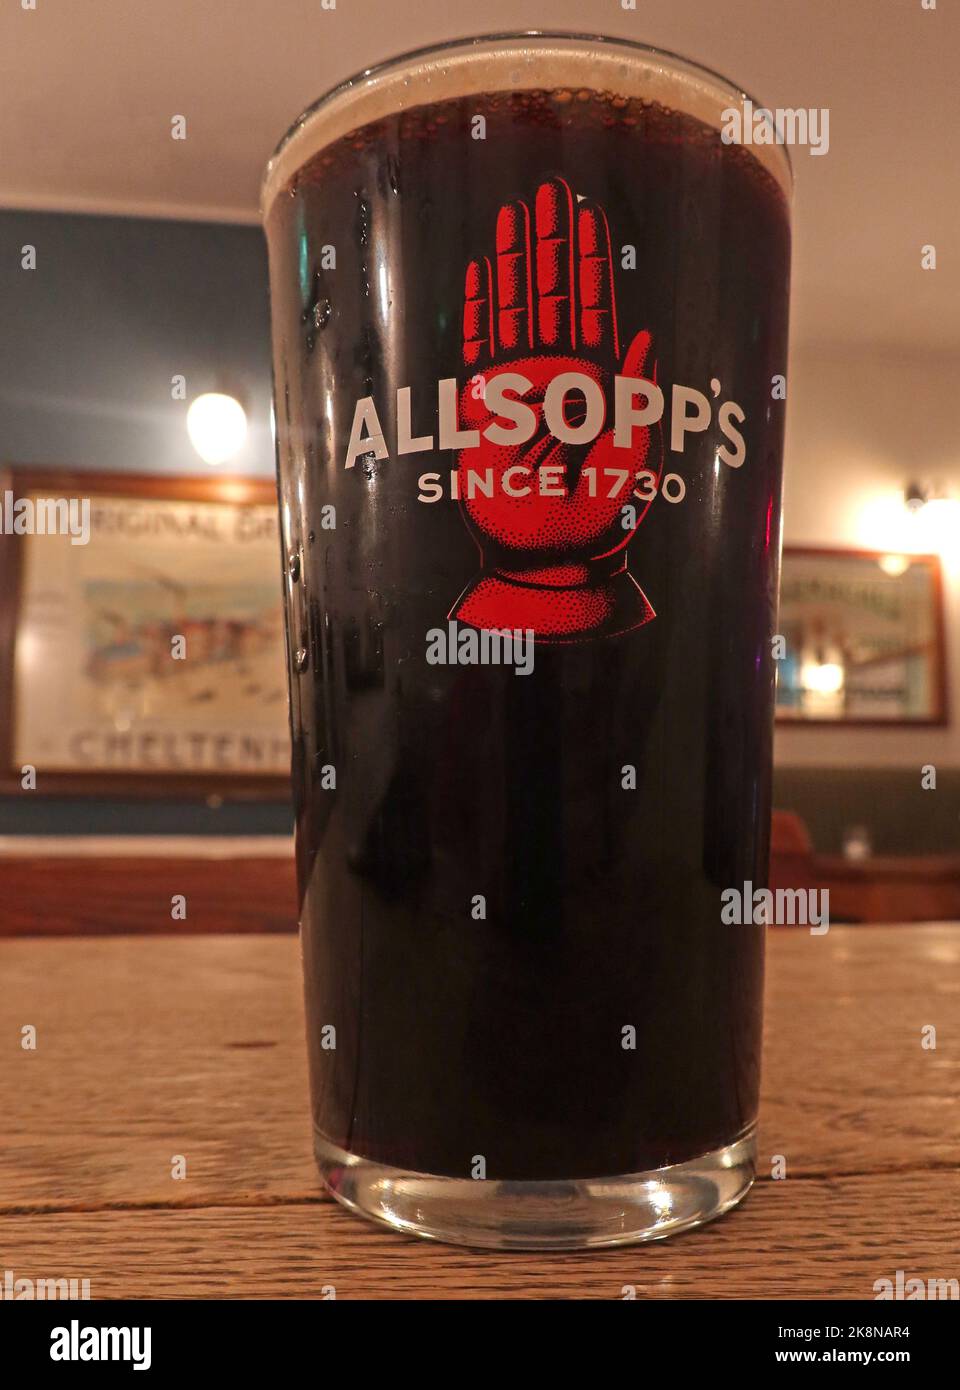 Pint glass in a bar, Allsopps Ales Since 1730, dark beer or stout, red hand logo trademark. Brewery Stock Photo